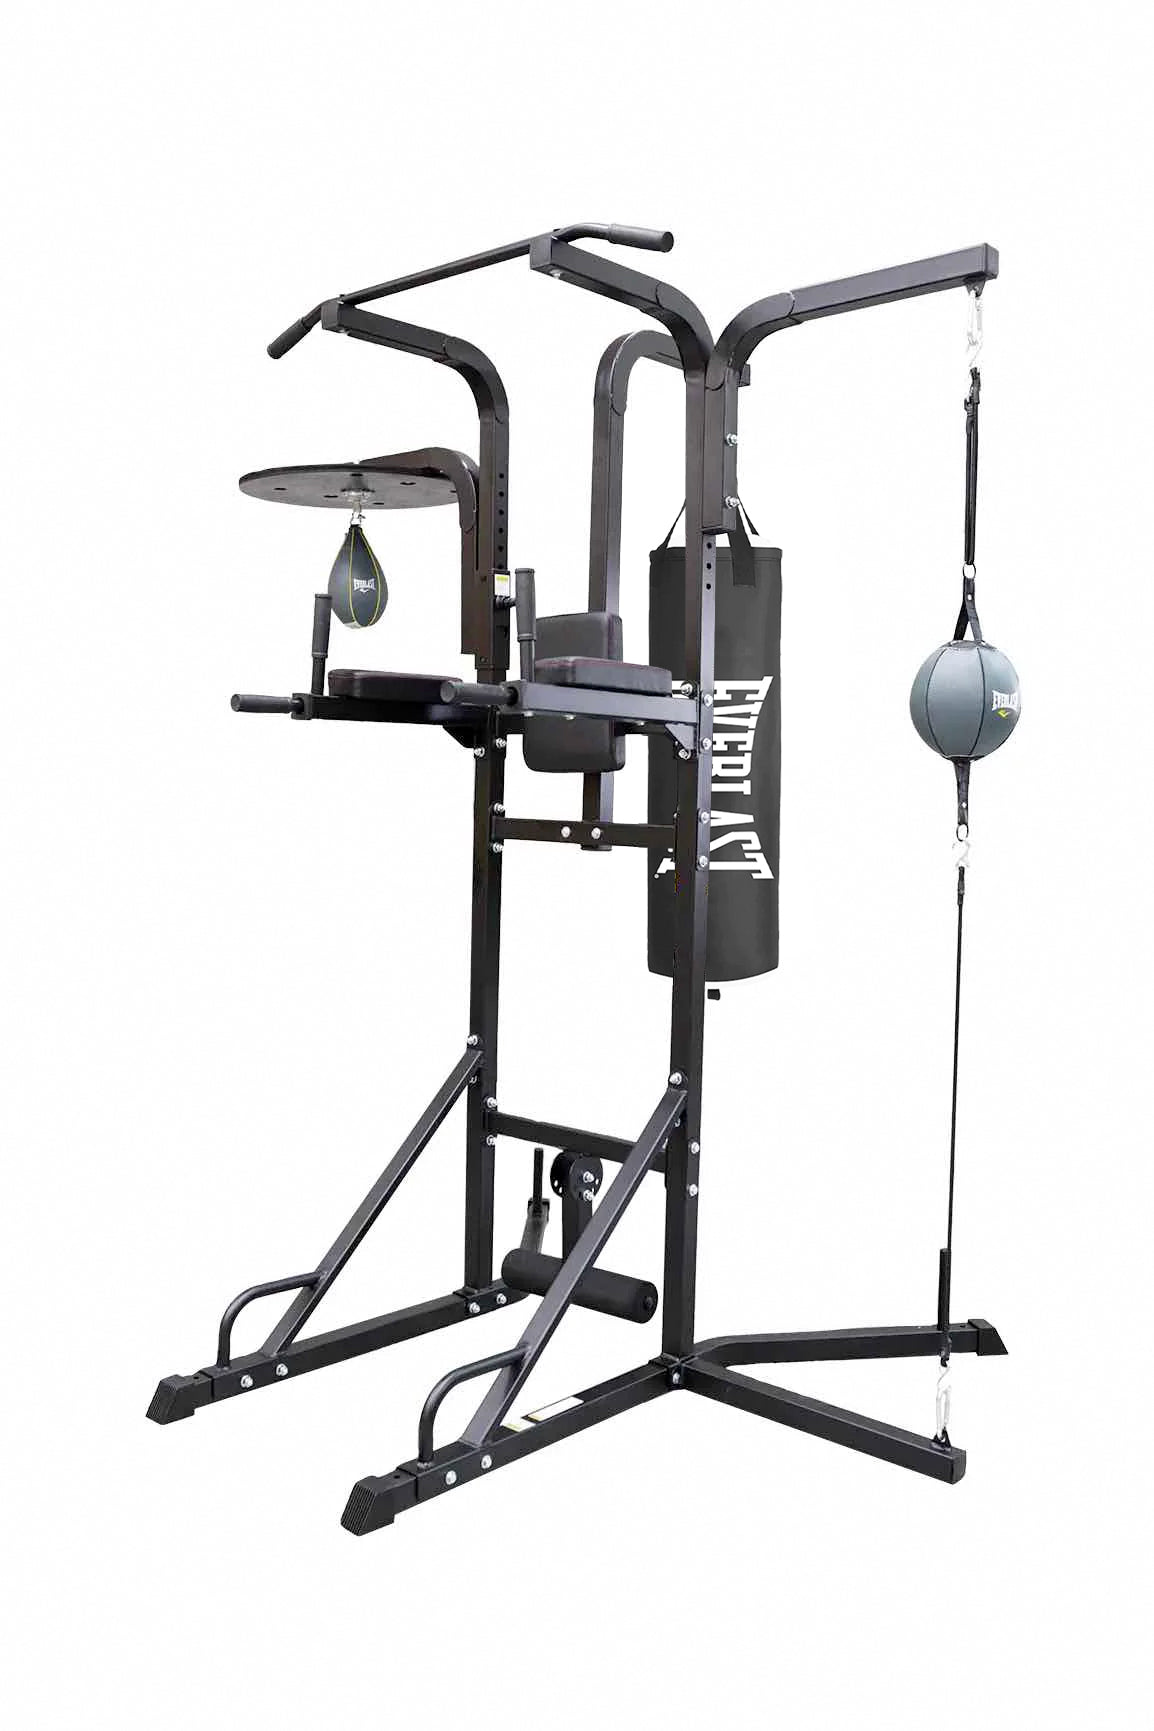 All-in-One Power Tower & Boxing Set – World Fitness